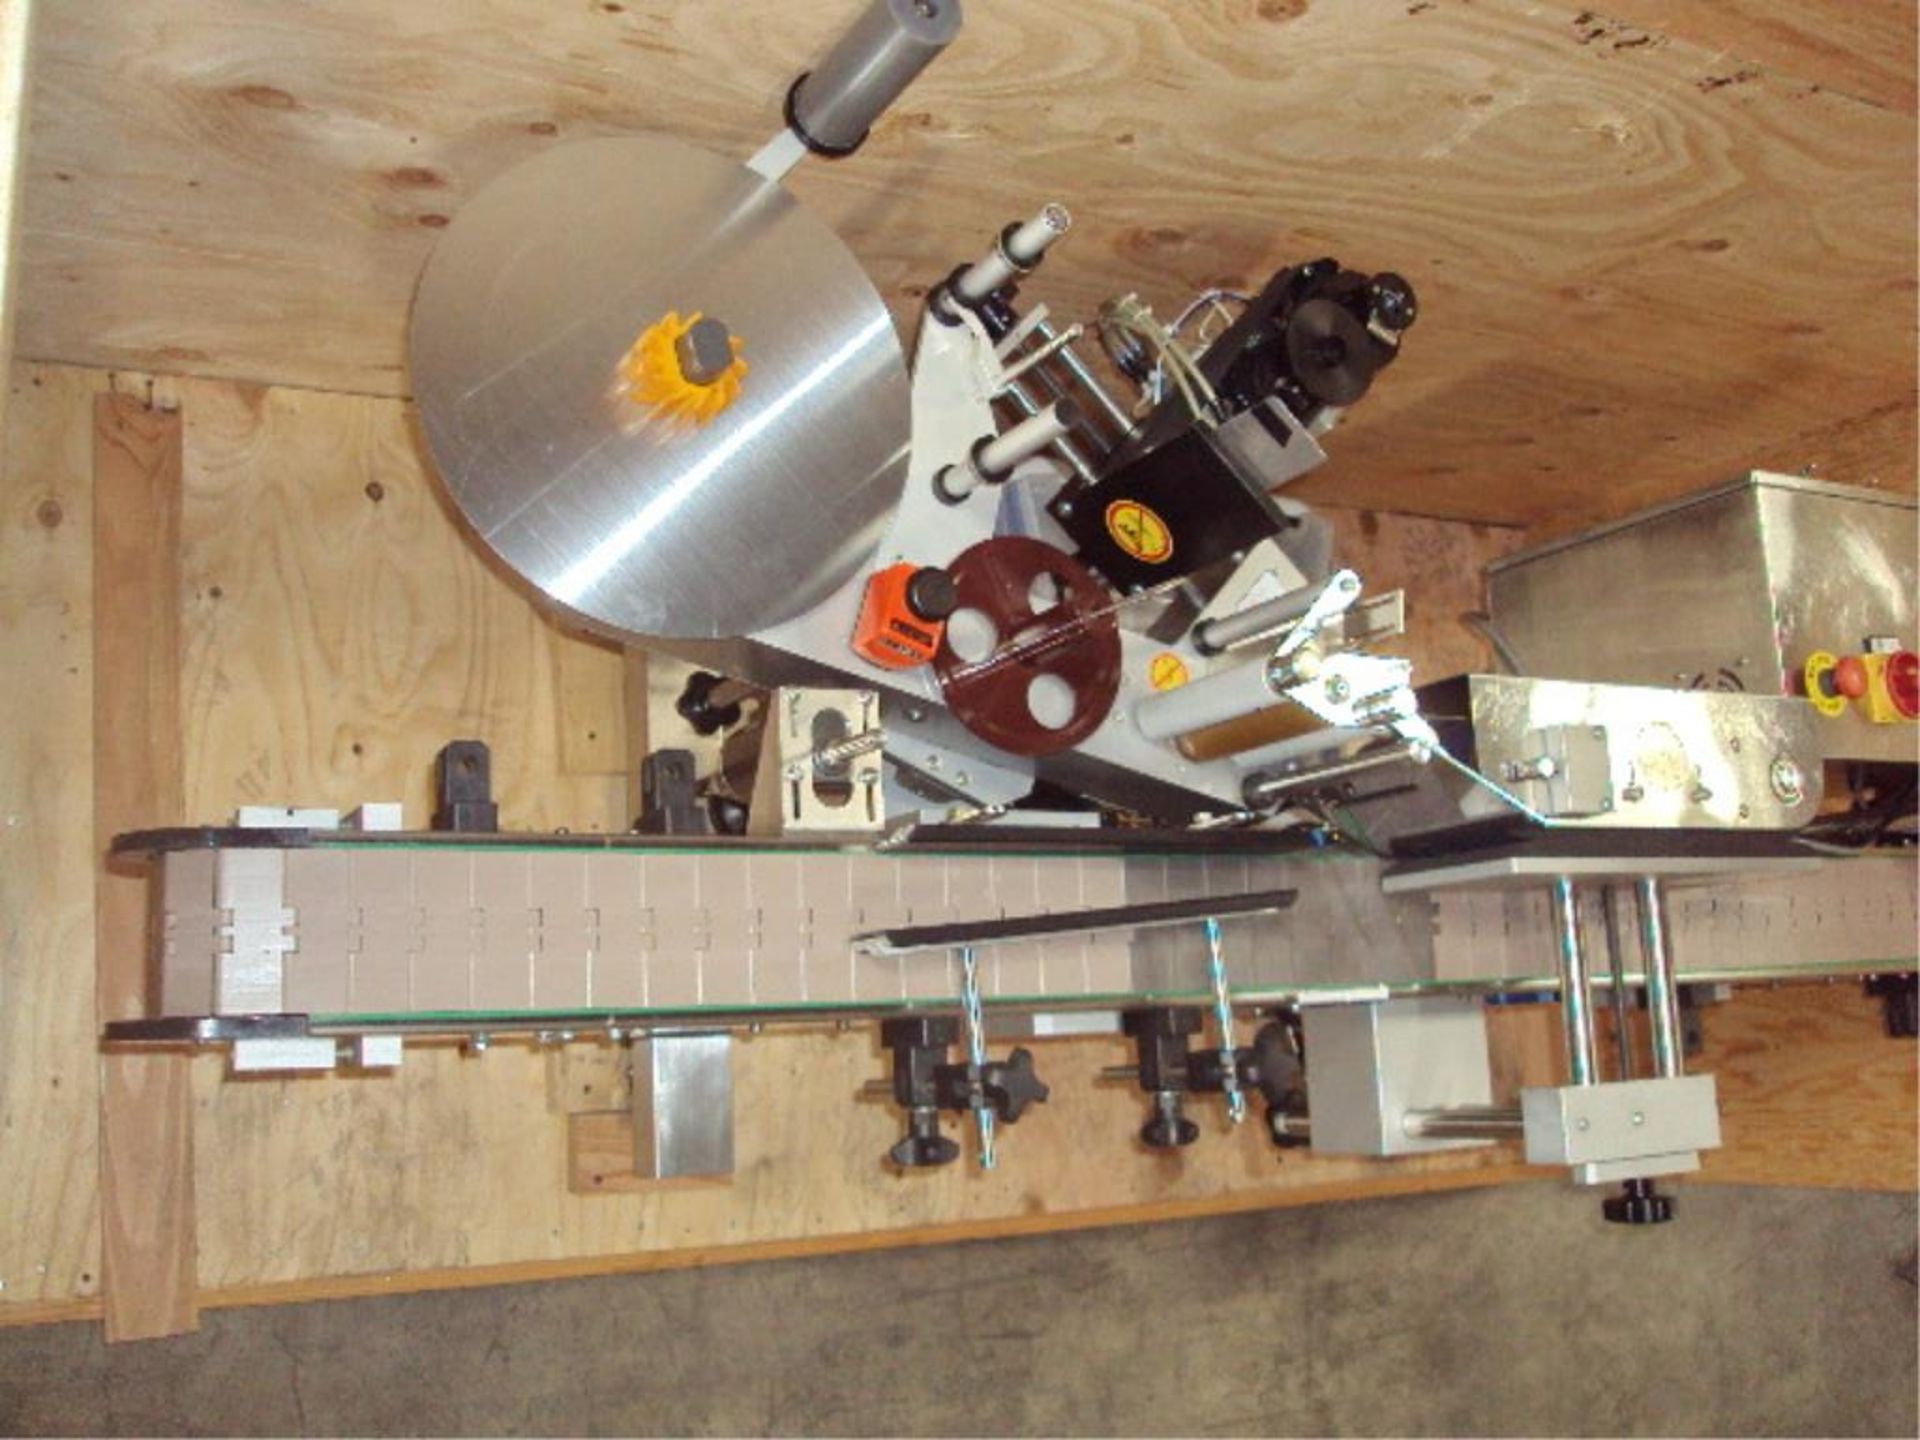 Wrap Labeler Machine With Pendant Controller - Image 3 of 14